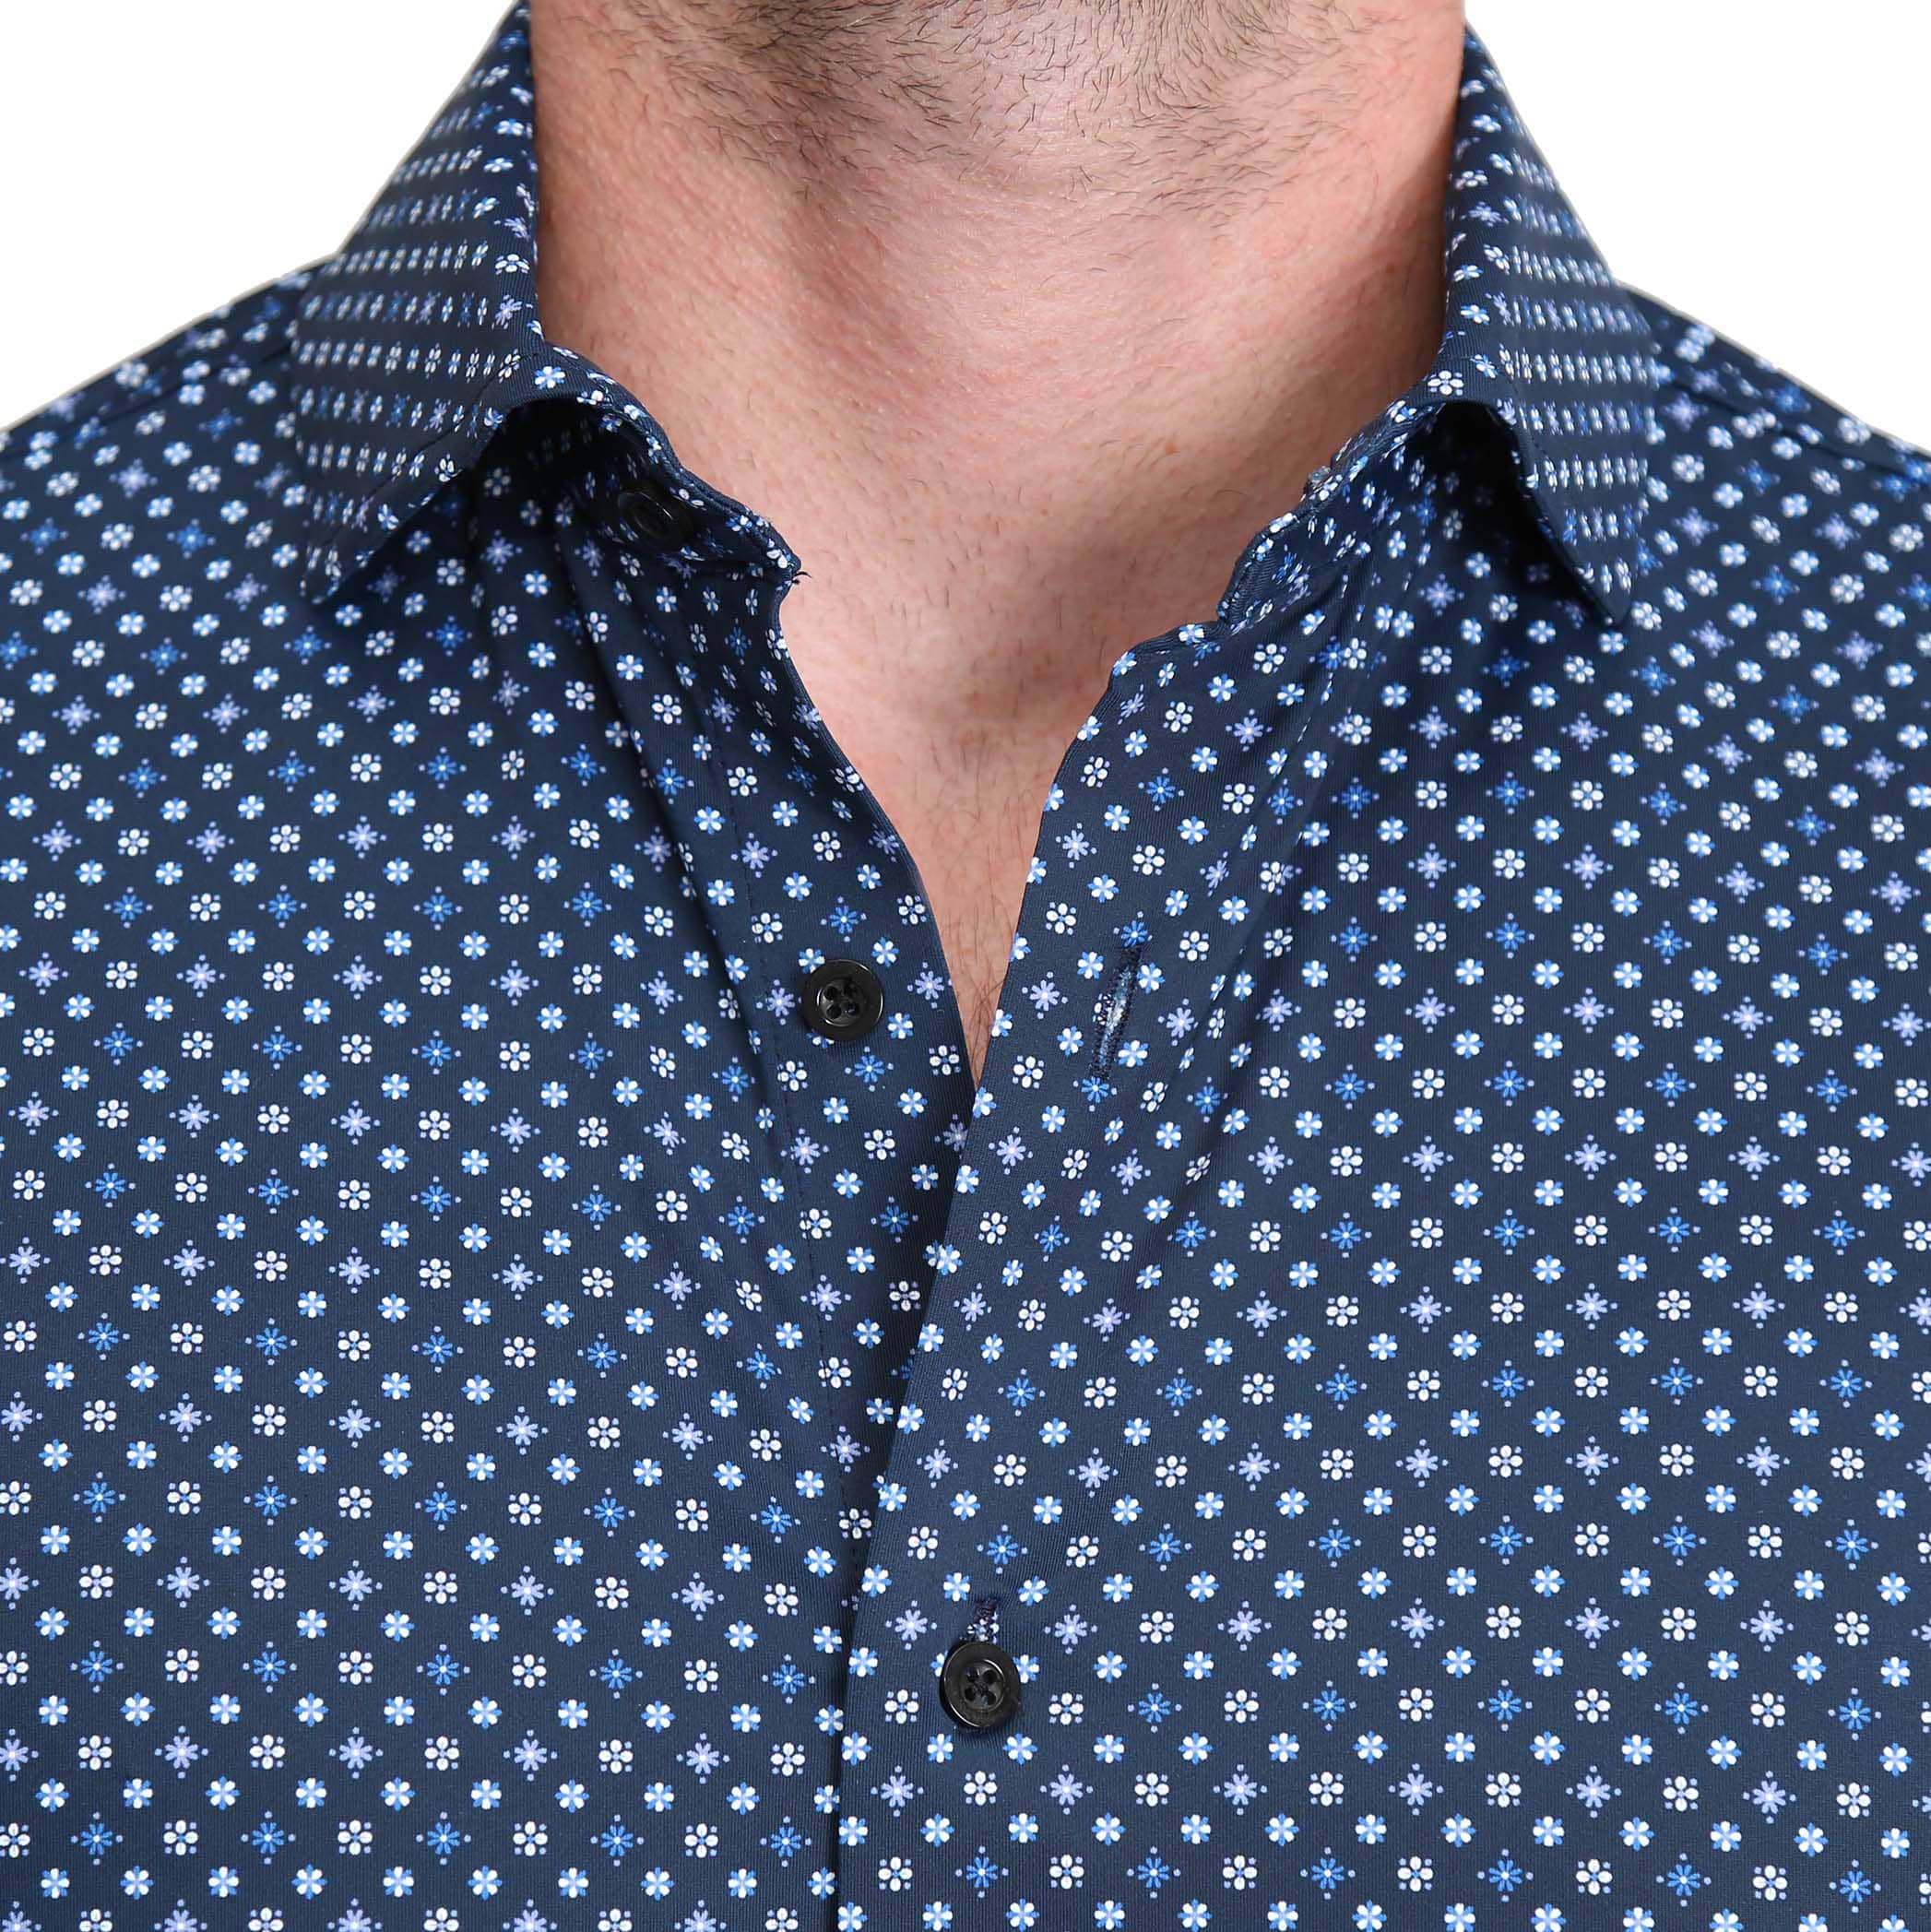 The Roth Black Short Sleeve Button Down